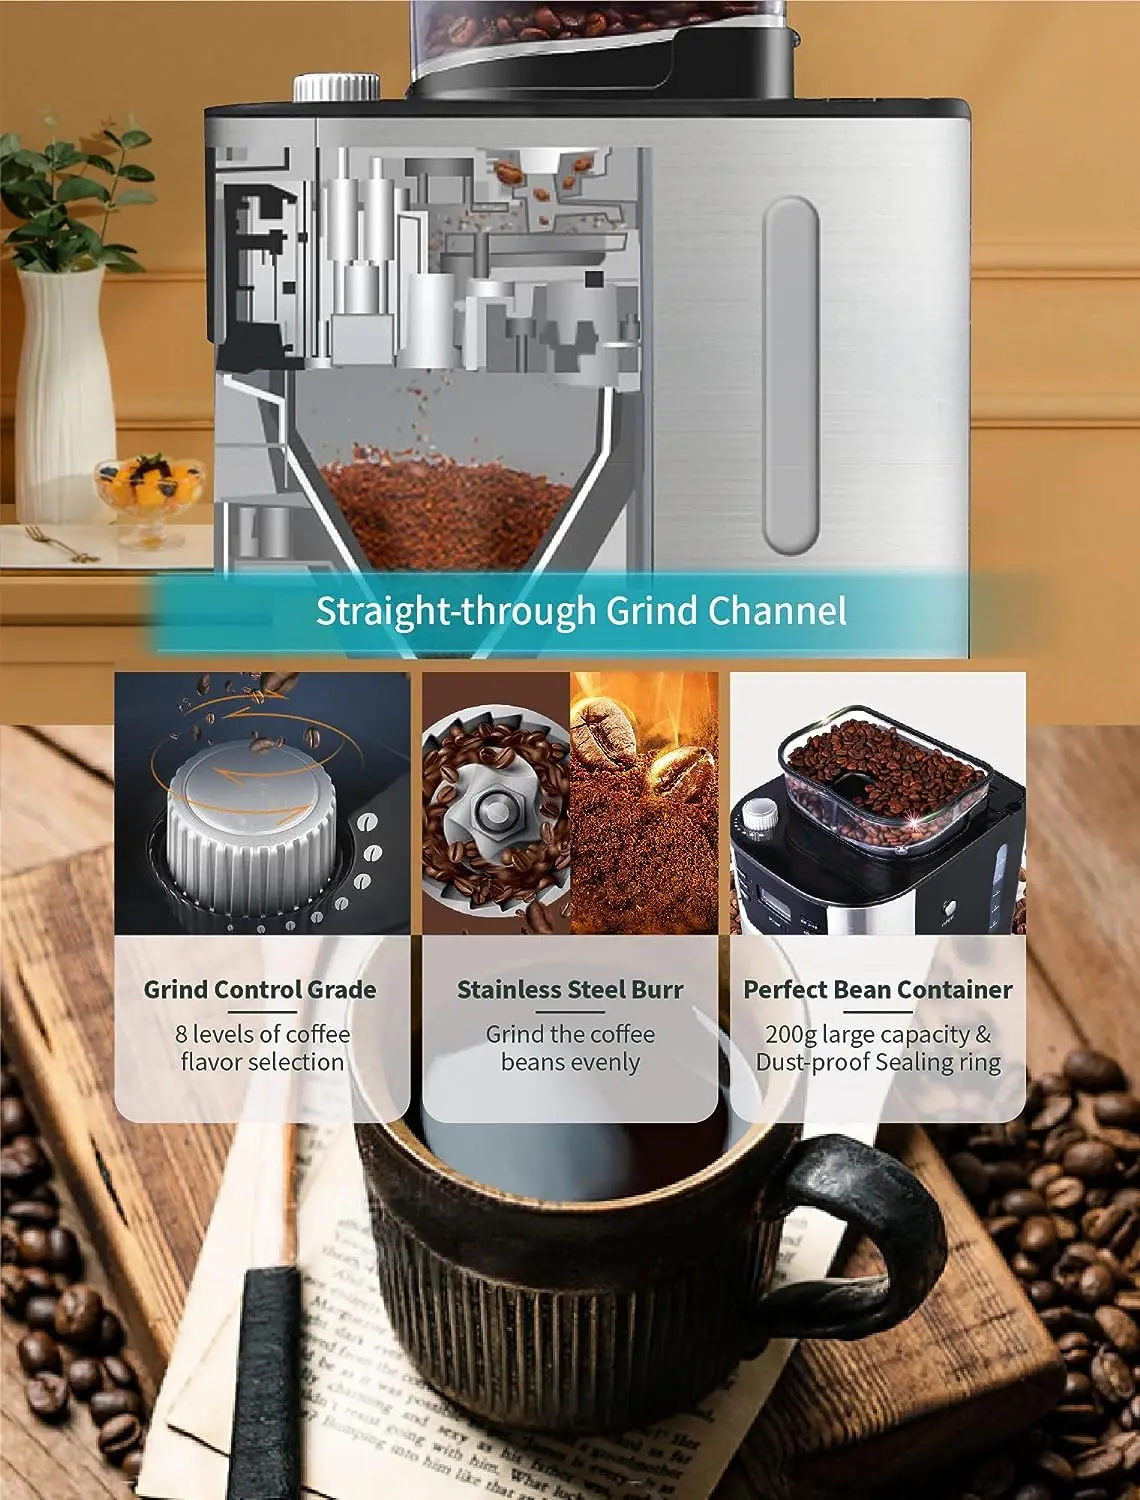 https://ae01.alicdn.com/kf/Seab5e970cc394a30a2f2b2ed45c84515R/Drip-Coffee-Maker-Brew-Automatic-Coffee-Machine-with-Built-In-Burr-Coffee-Grinder-Programmable-Timer-Mode.jpg